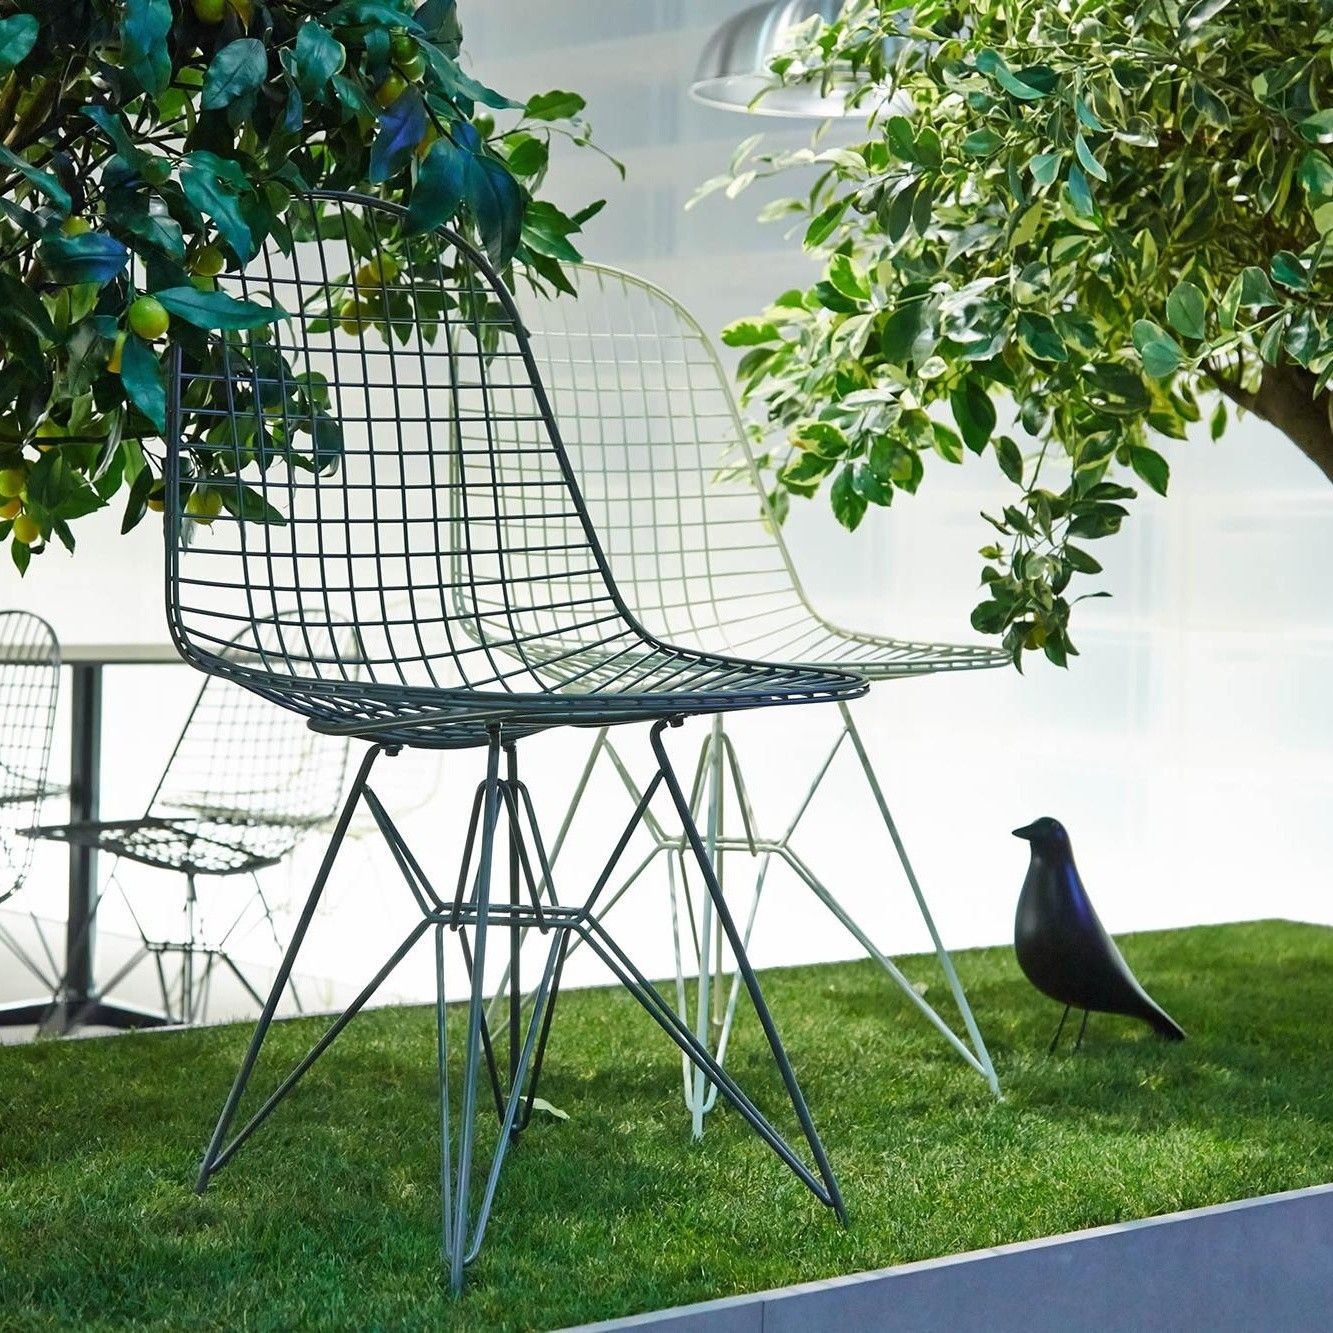 Figurine of EAMES BIRD by Vitra